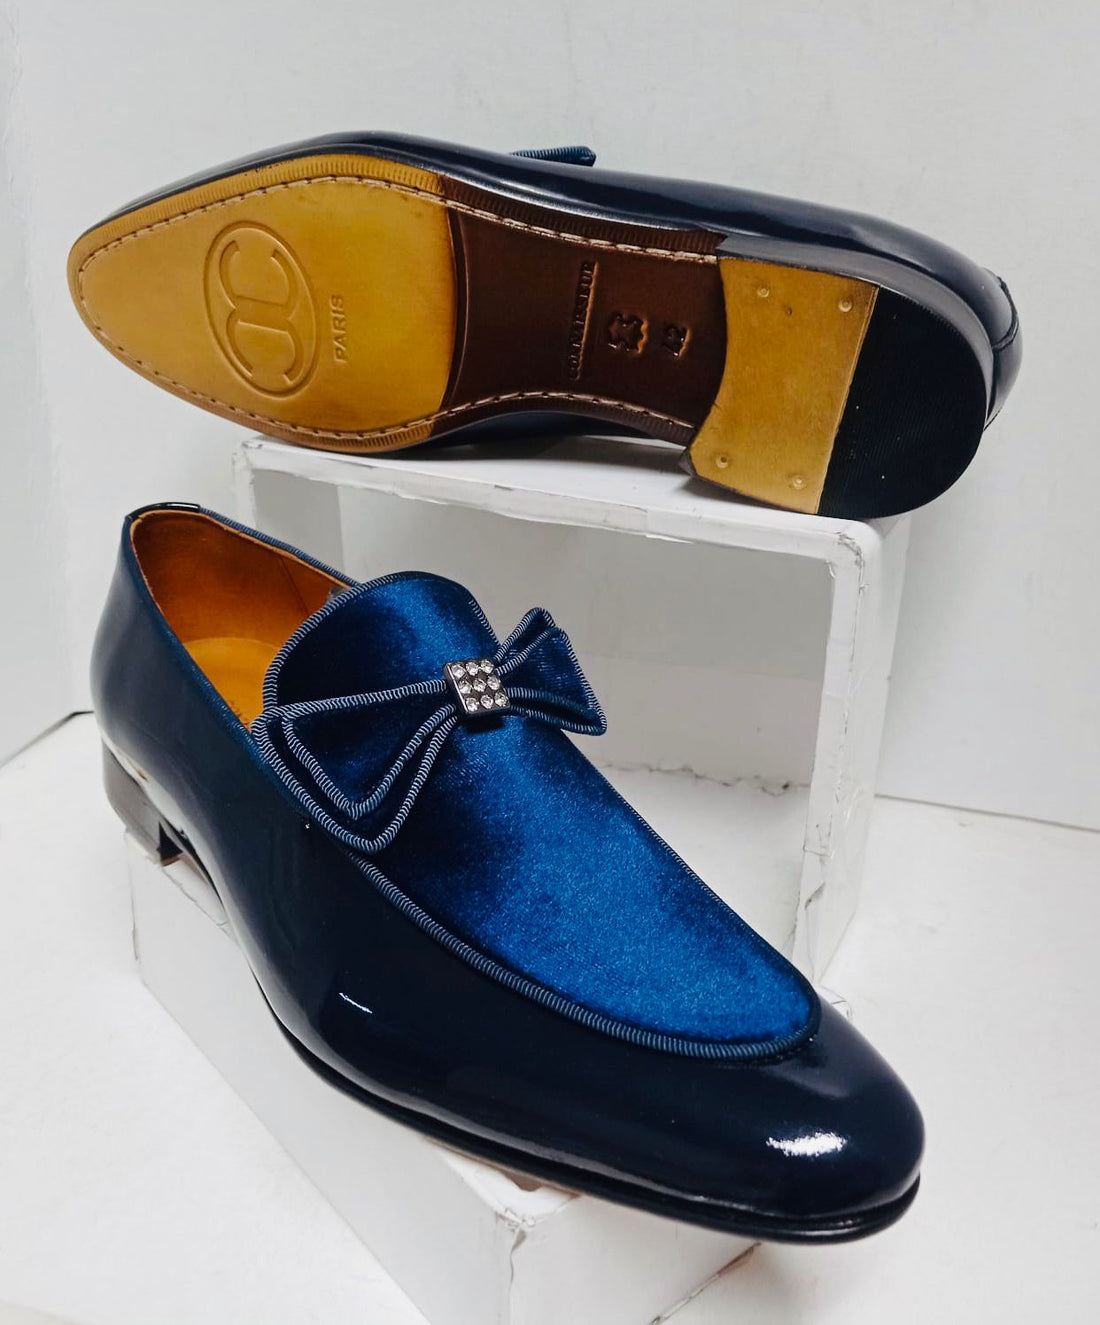 Connaisseur - Navy blue patent leather with blue velvet upper and bow tie detail on instep dress loafer